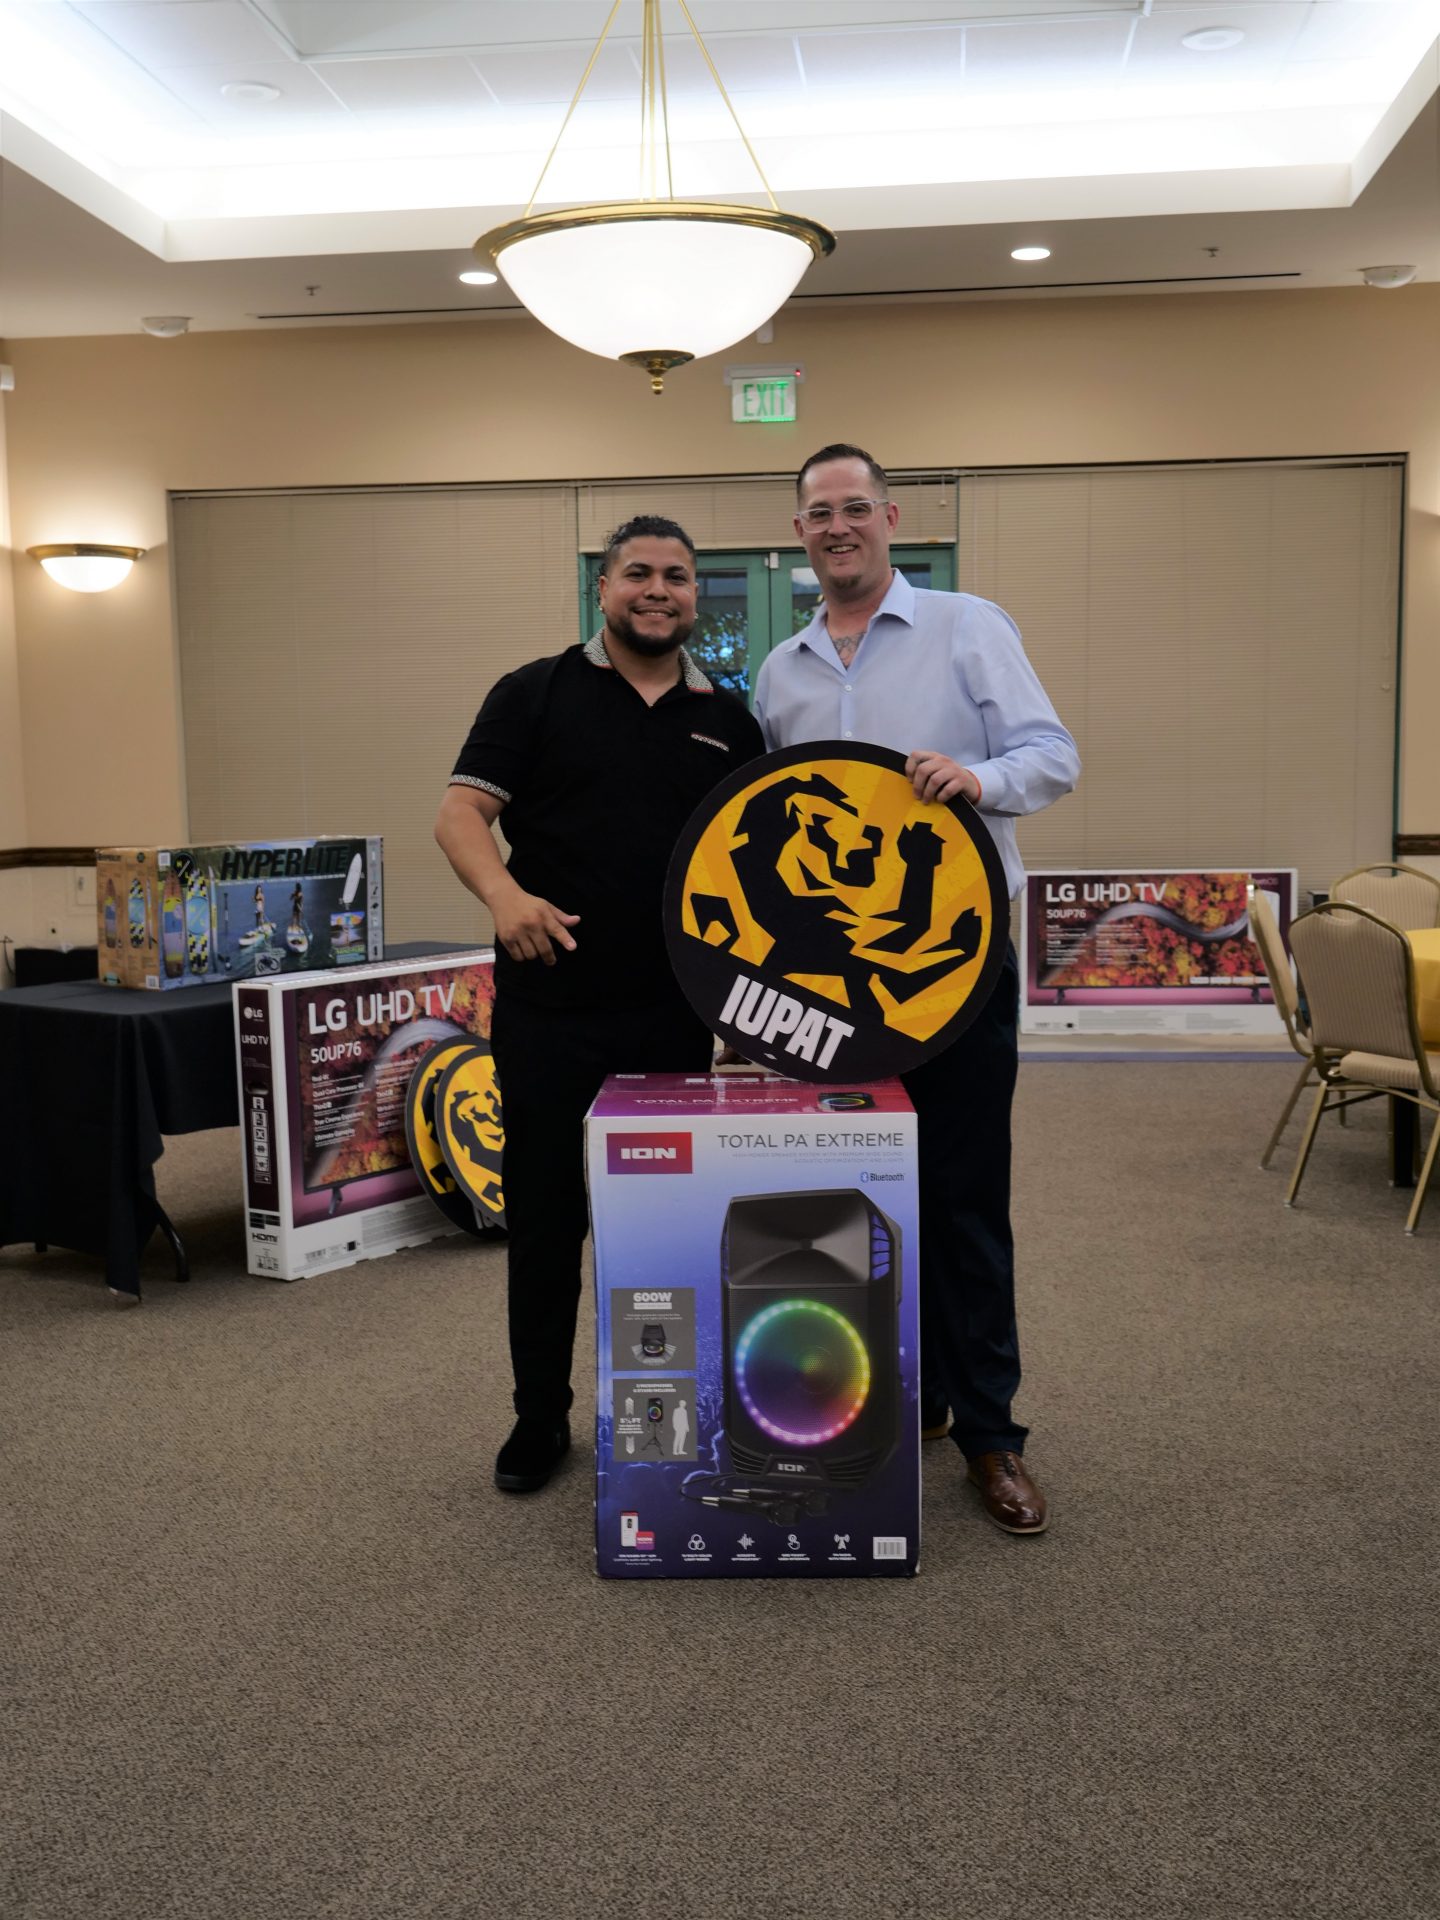 Image from the Gallery: VAC Banquet – Livermore, CA